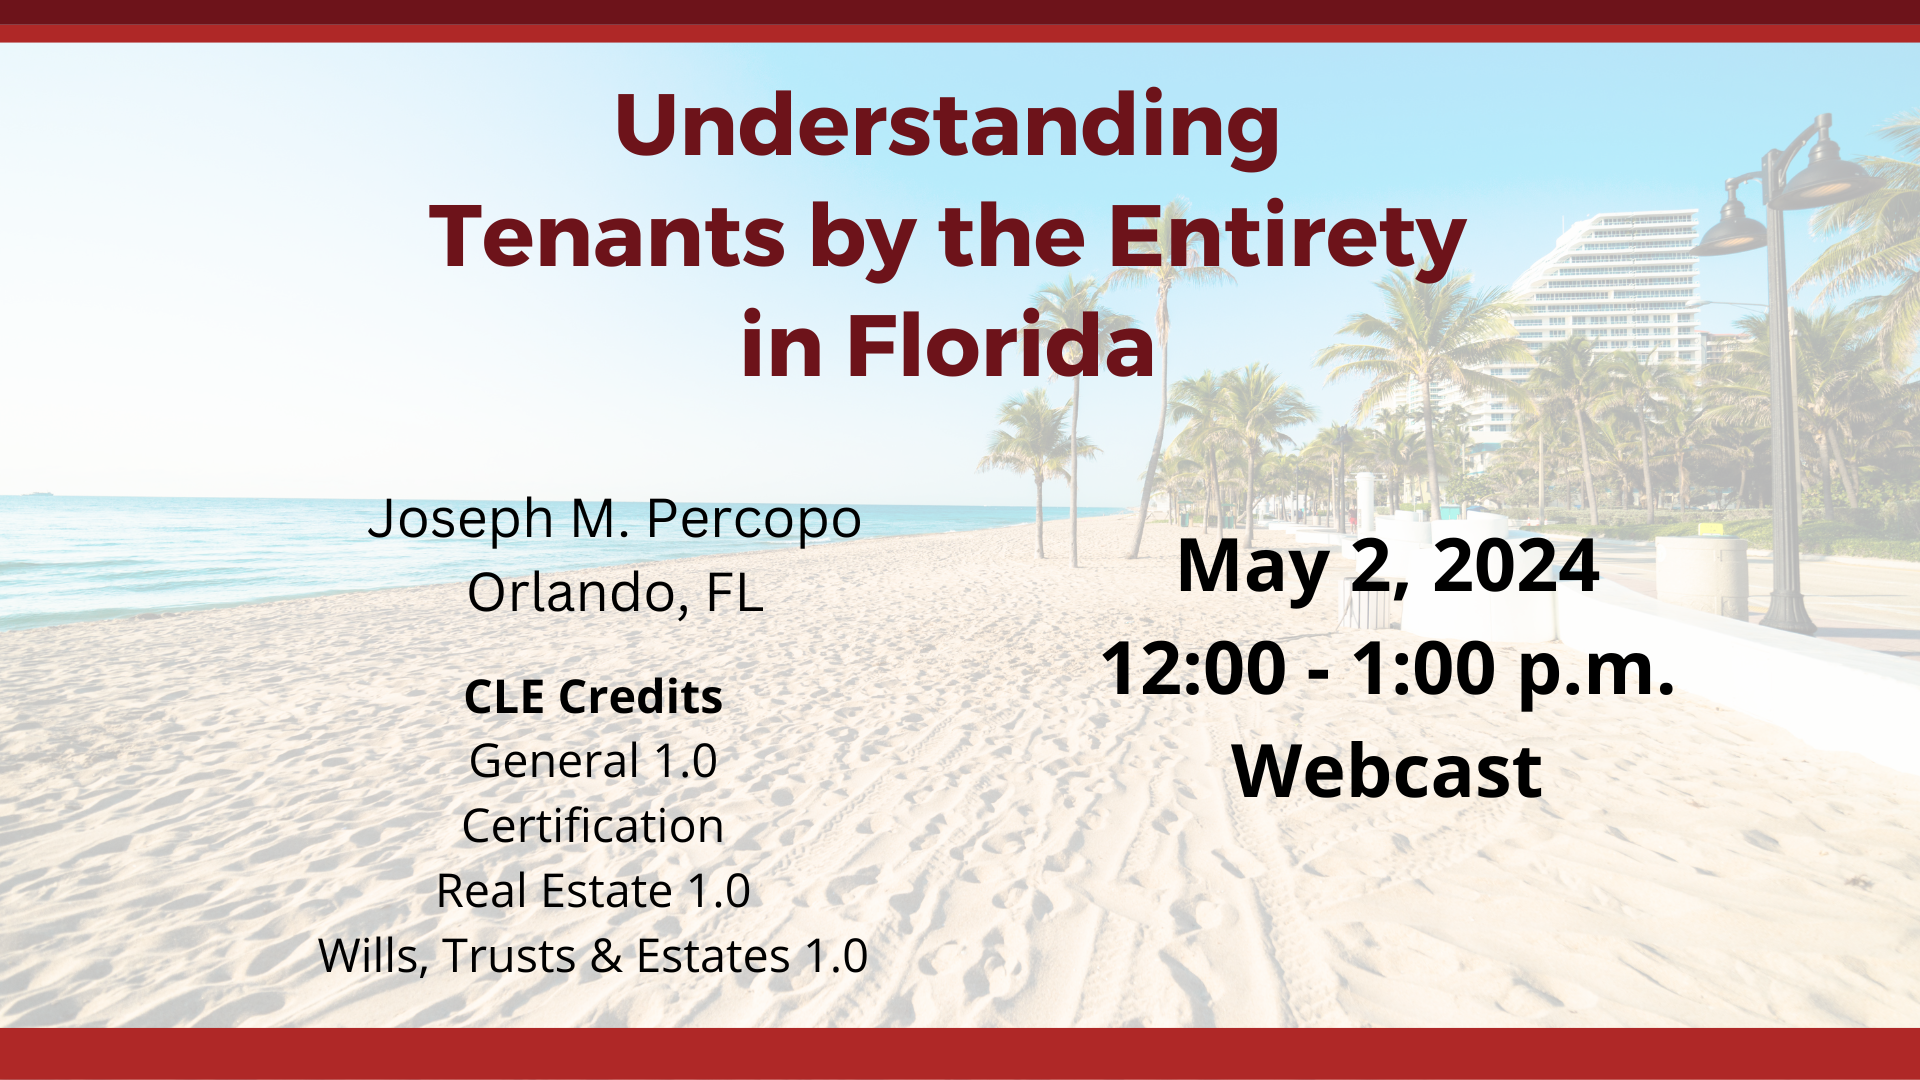 Understanding Tenants by the Entirety in Florida